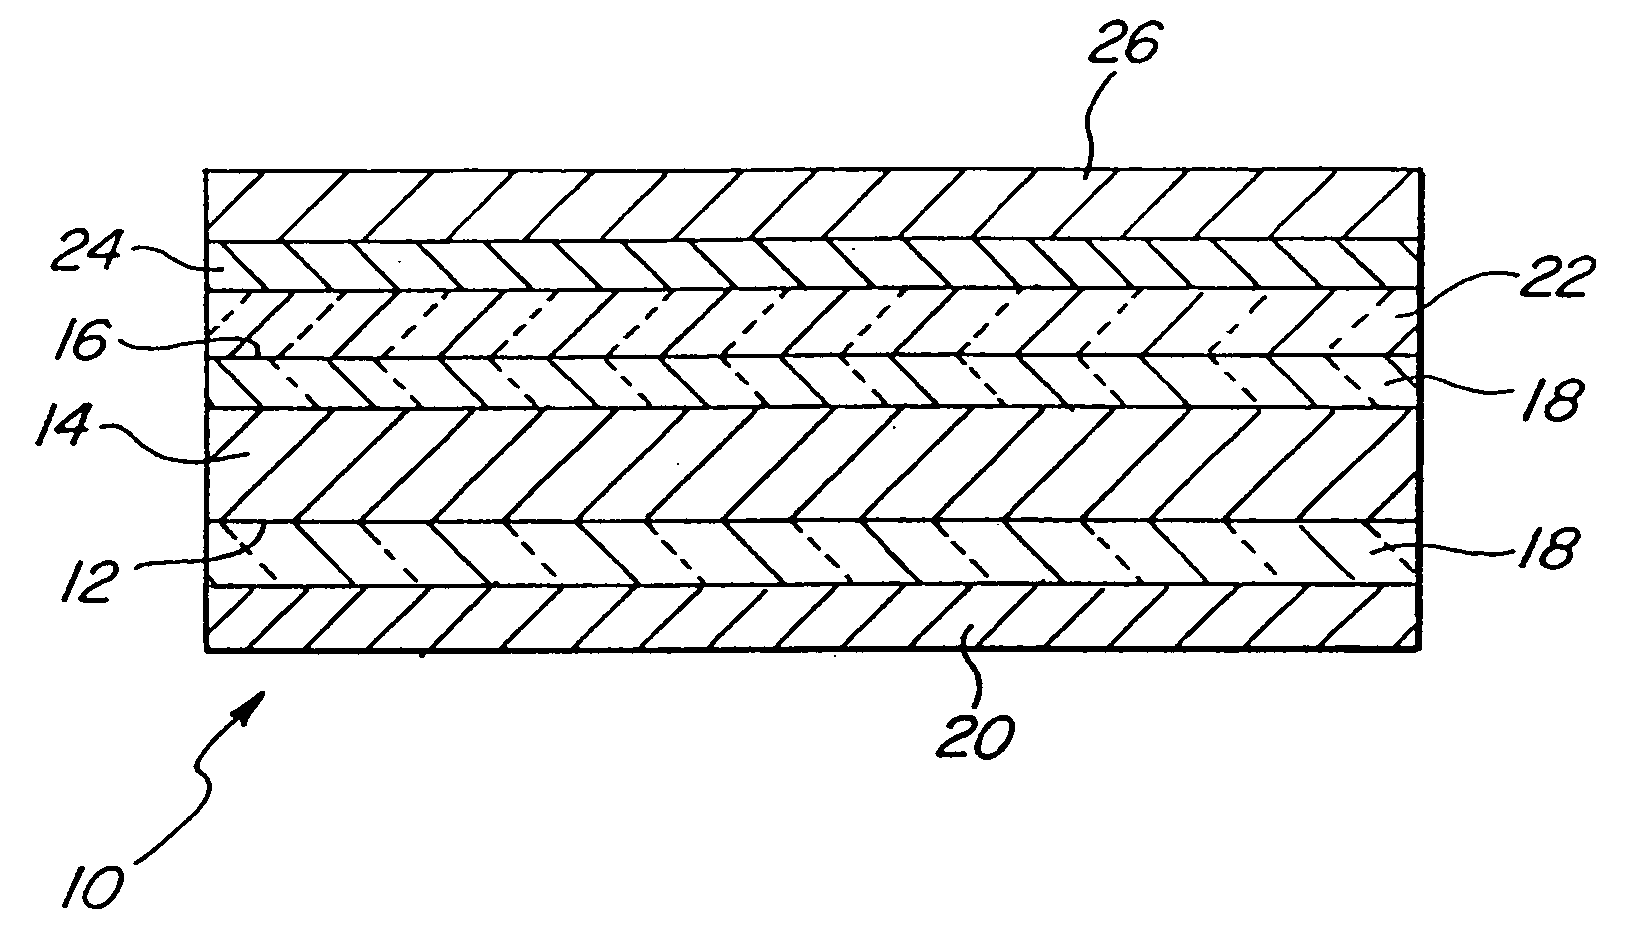 Transparent plastic optical components and abrasion resistant polymer substrates and methods for making the same